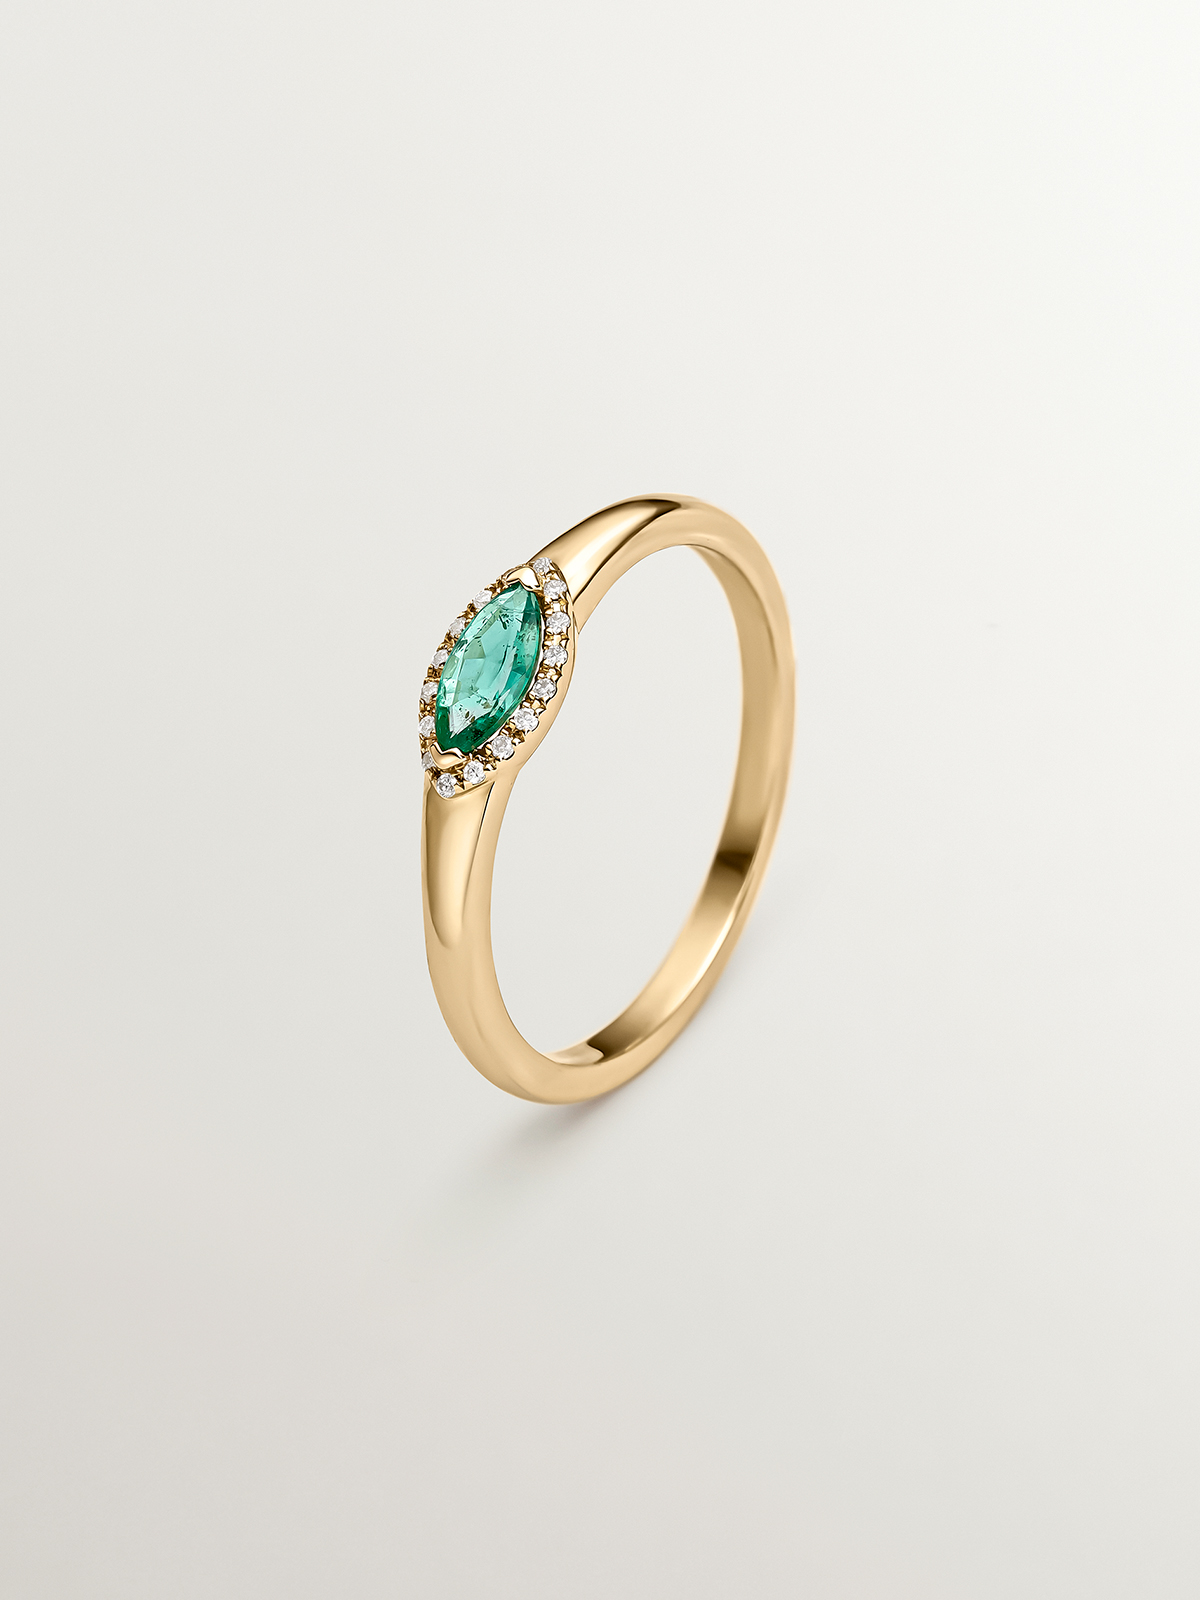 9K Yellow Gold Ring with Emerald and Diamonds